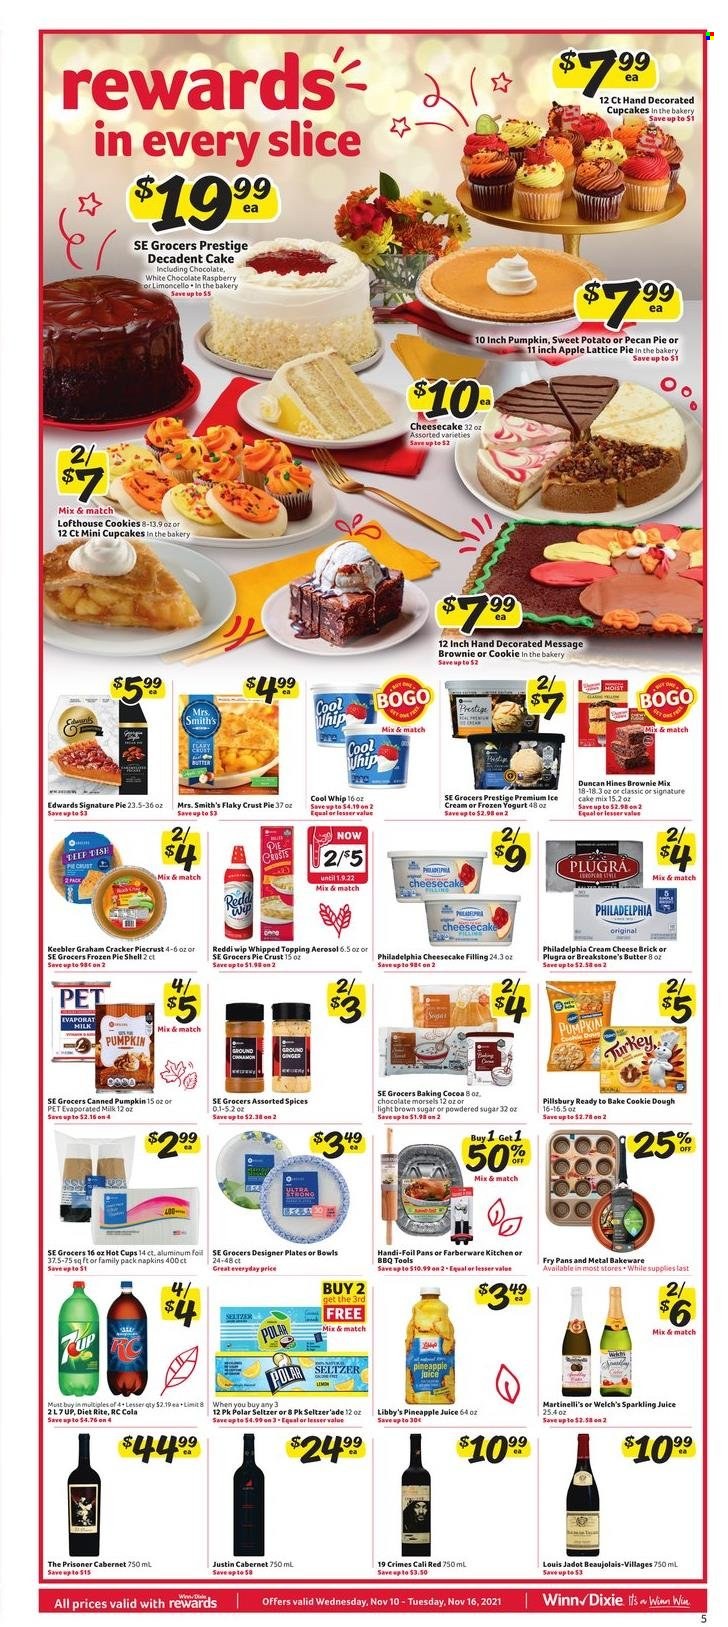 thumbnail - Winn Dixie Flyer - 11/10/2021 - 11/16/2021 - Sales products - cupcake, brownie mix, cake mix, ginger, sweet potato, pineapple, Welch's, Pillsbury, cream cheese, Philadelphia, cheese, yoghurt, milk, butter, Cool Whip, ice cream, cookie dough, cookies, crackers, Keebler, Smith's, cane sugar, cocoa, pie crust, topping, icing sugar, ground ginger, pineapple juice, juice, sparkling juice, seltzer water, Cabernet Sauvignon, Limoncello, napkins, plate, cup, bakeware, aluminium foil. Page 5.